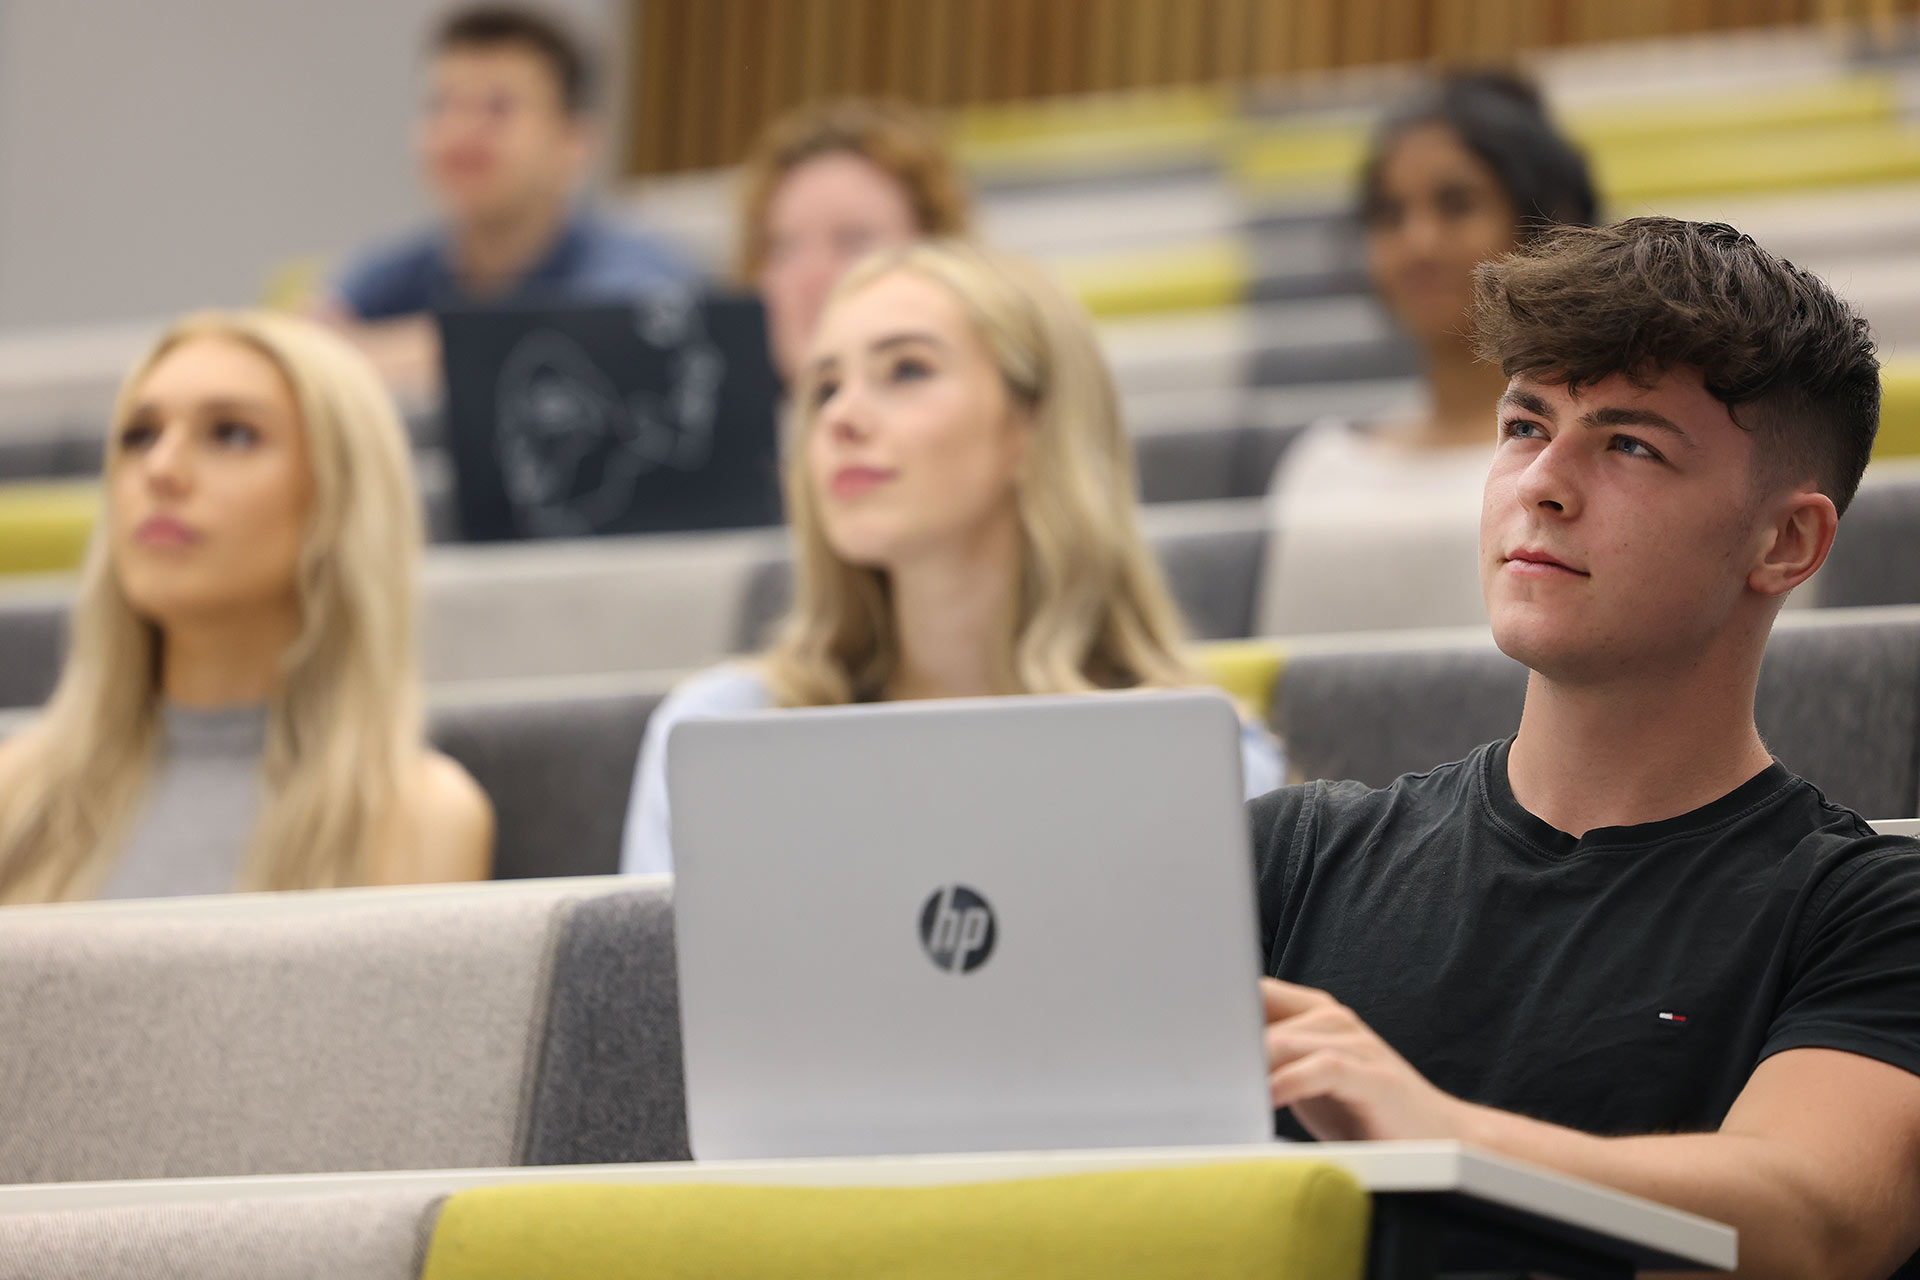 Students sitting in a lecture theatre, student in main focus is using a laptop